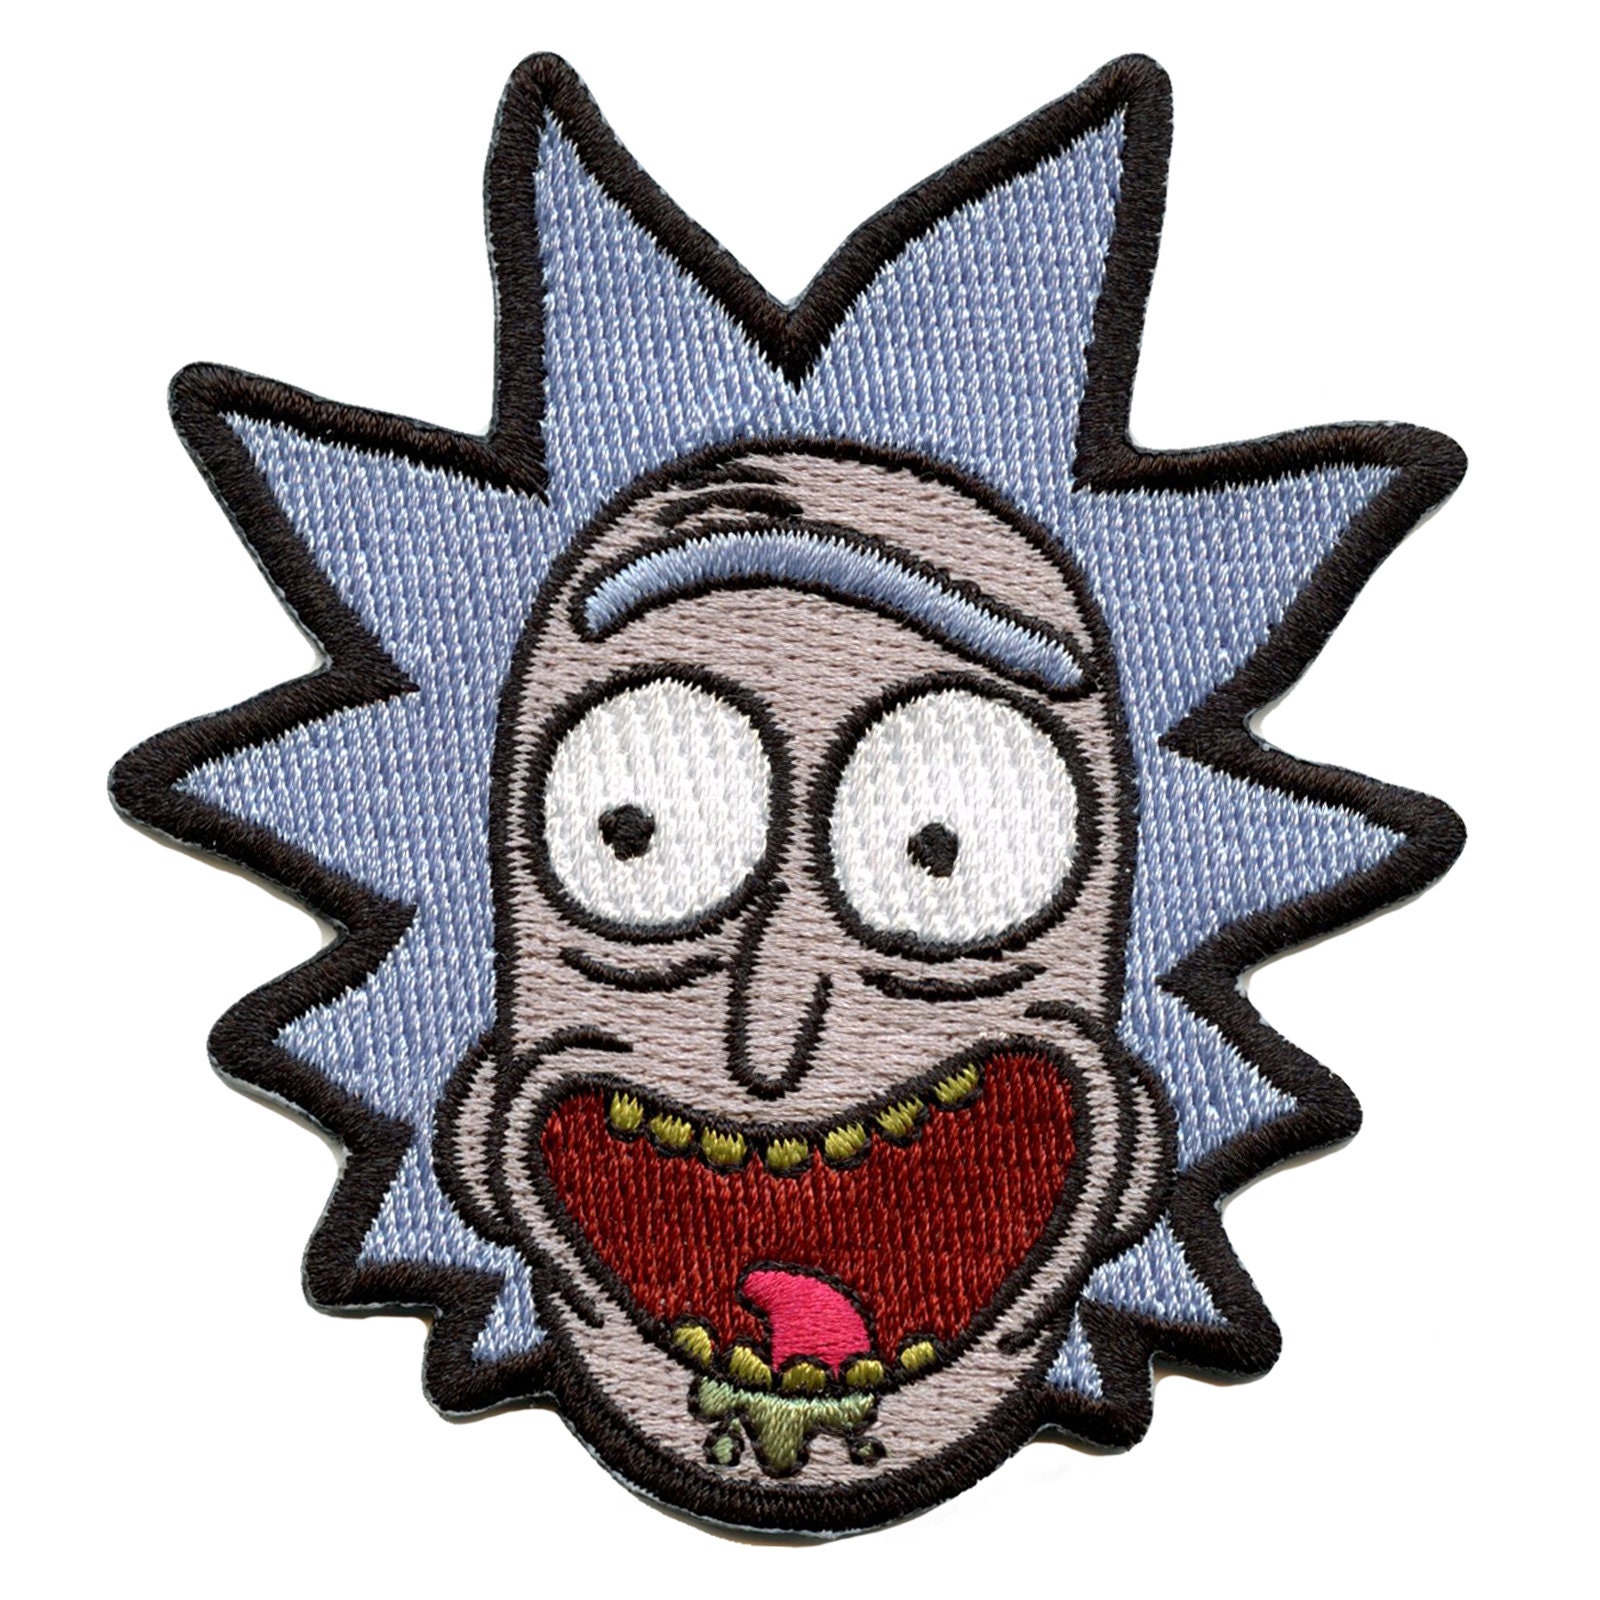  Rick Sanchez - Rick and Morty Parody PVC Morale Patch with Hook  Backing : Arts, Crafts & Sewing